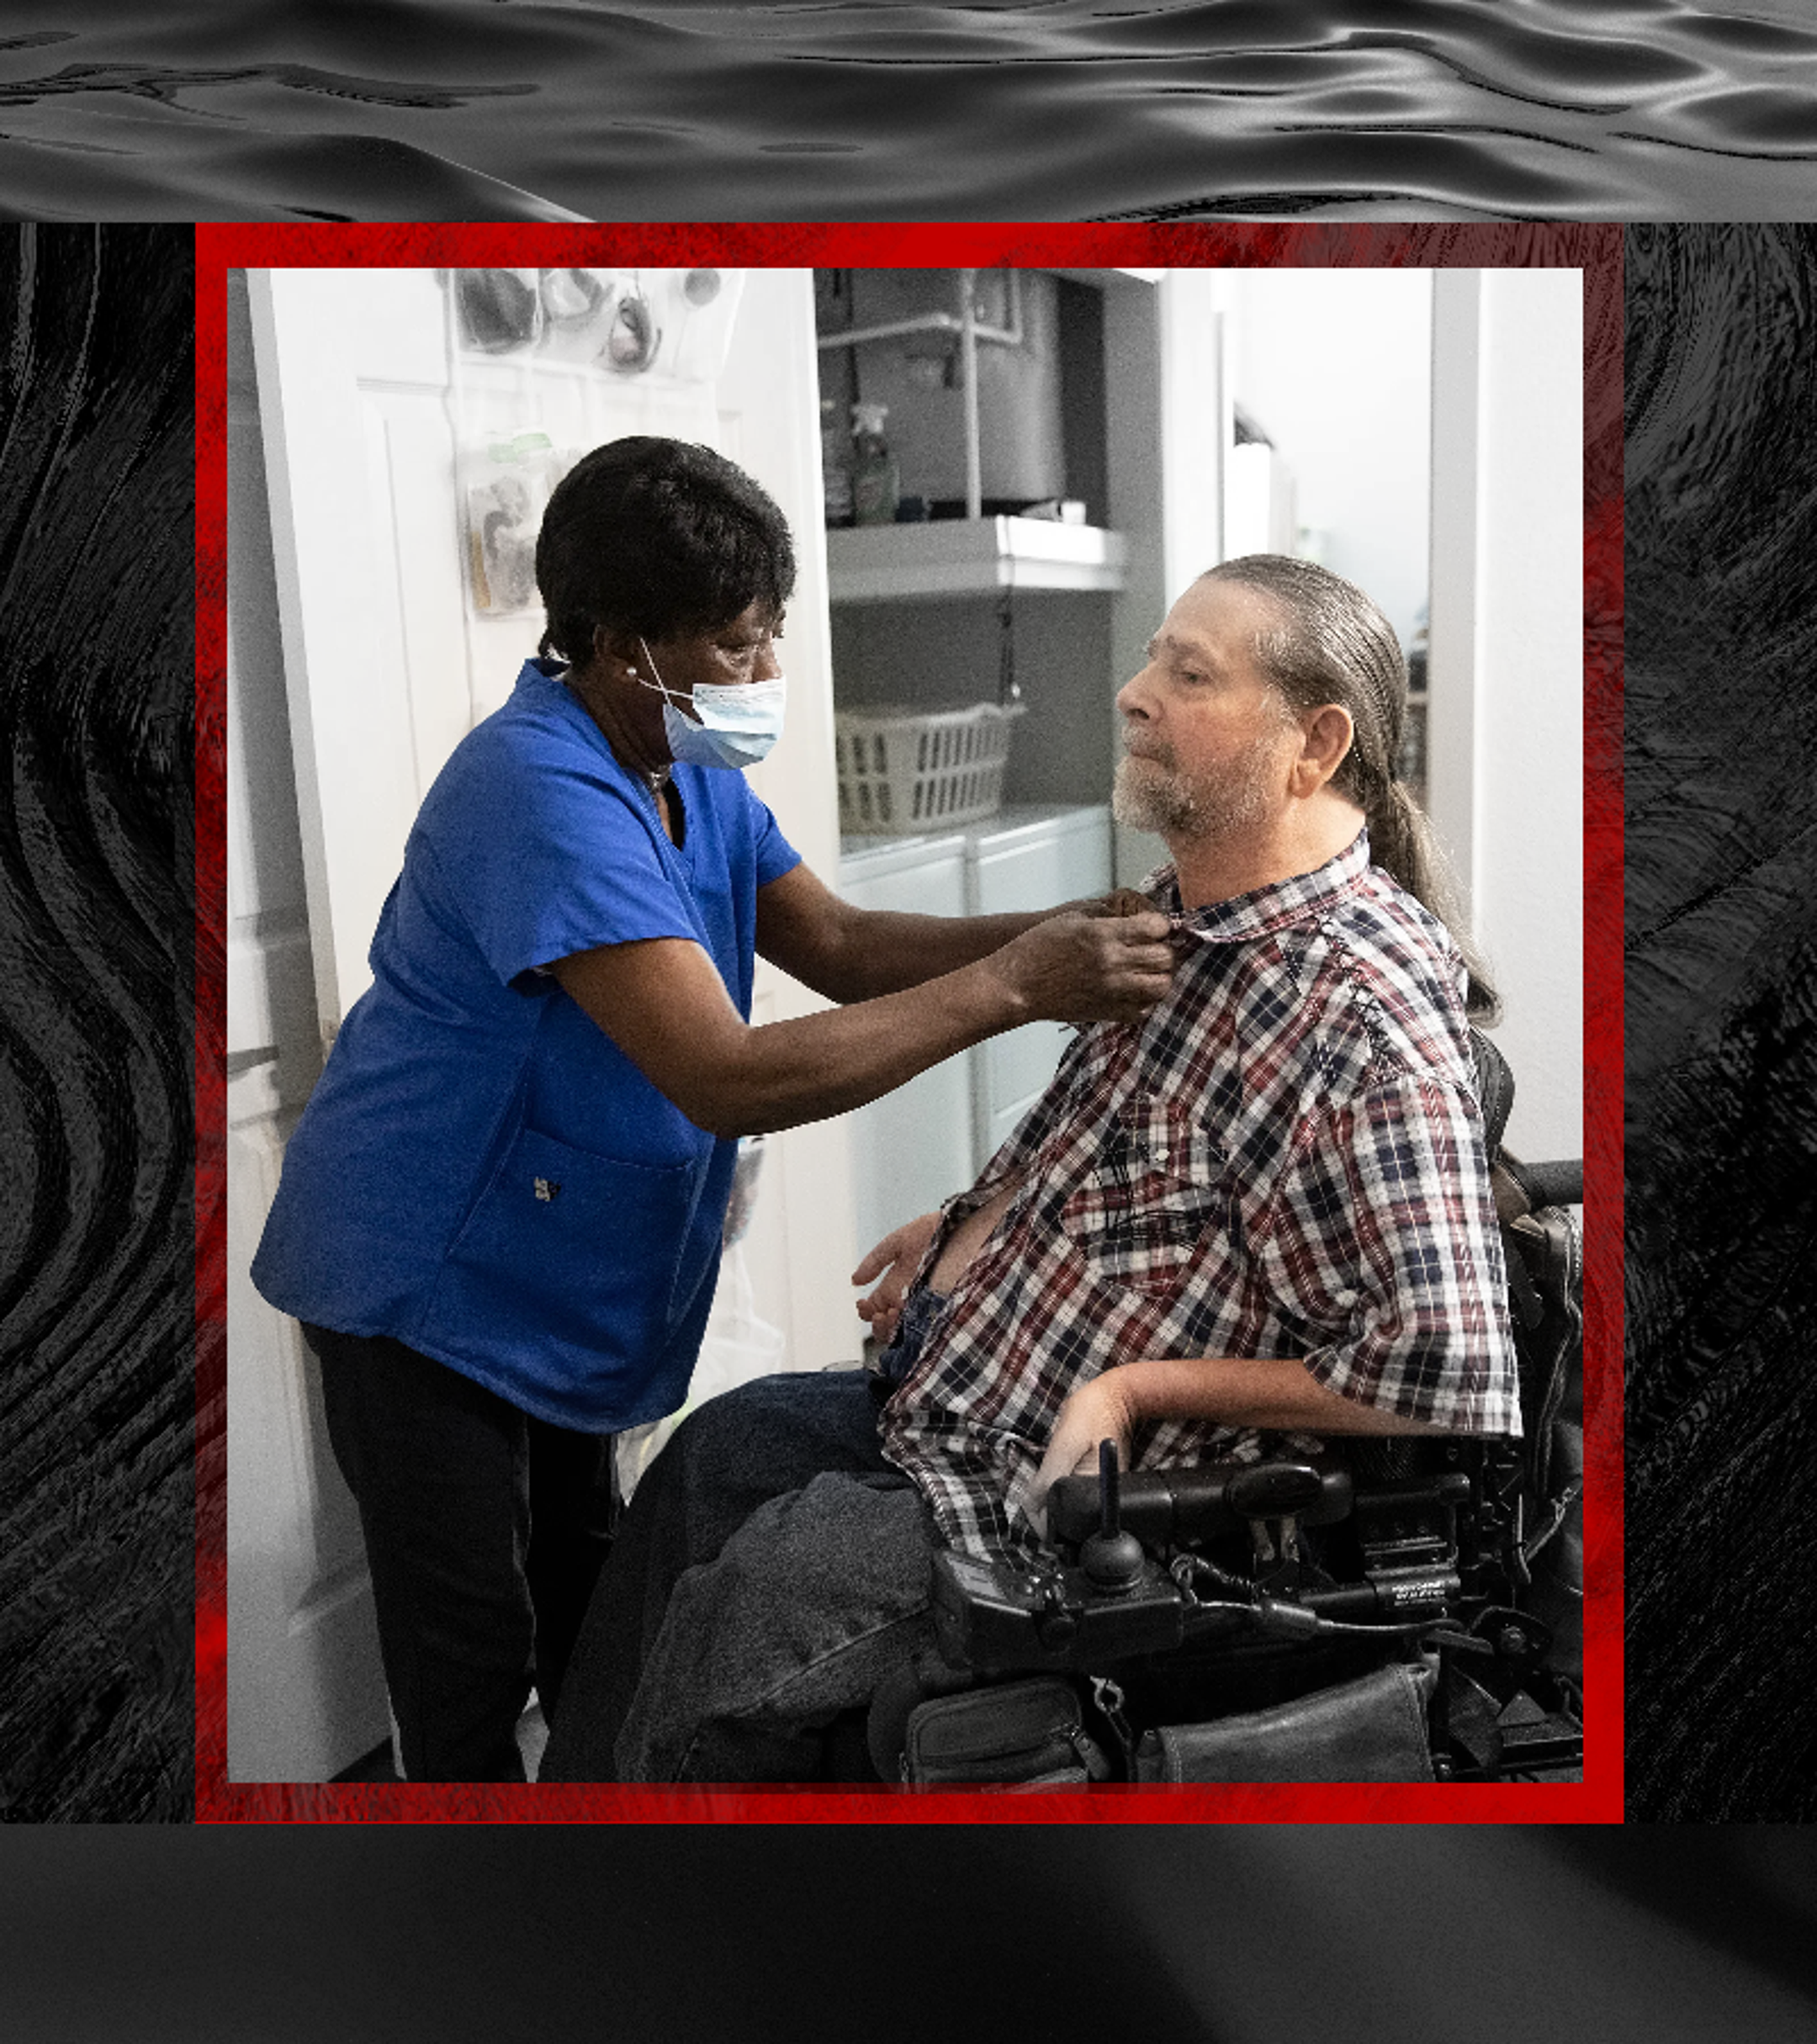 Home health caregiver Shirley Eason works on the buttons at Gene Rodgers' shirt collar. The photo is desaturated except for Eason, who is standing, and Rodgers, who is seated. A border of dark water surrounds the photograph.